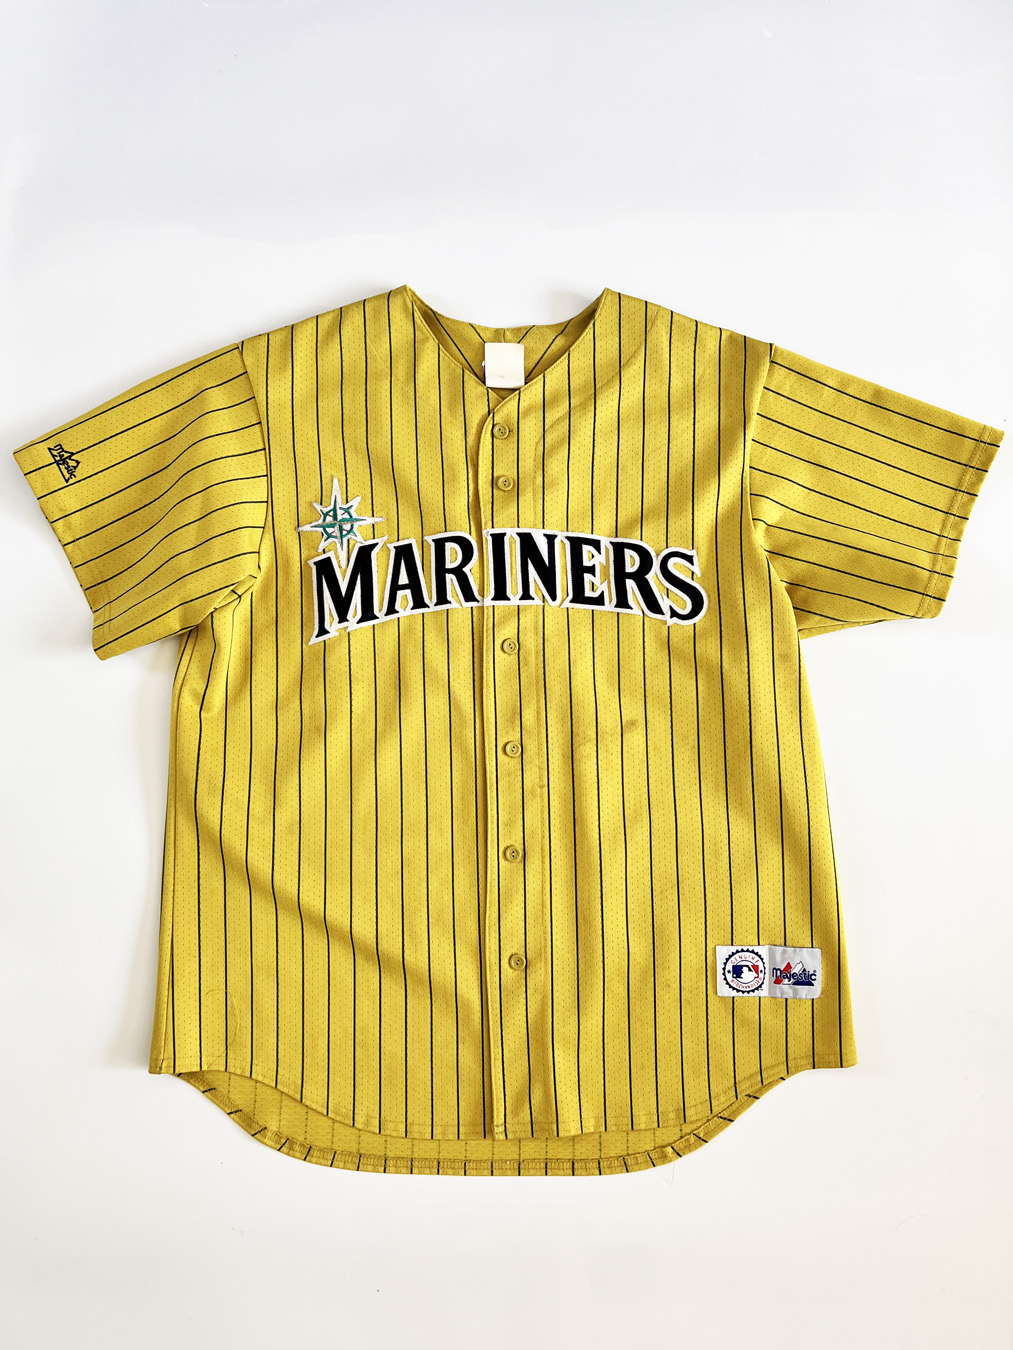 Seattle Mariners 90s Majestic teal pinstripes alternate jersey 2XL vtg MLB  1995